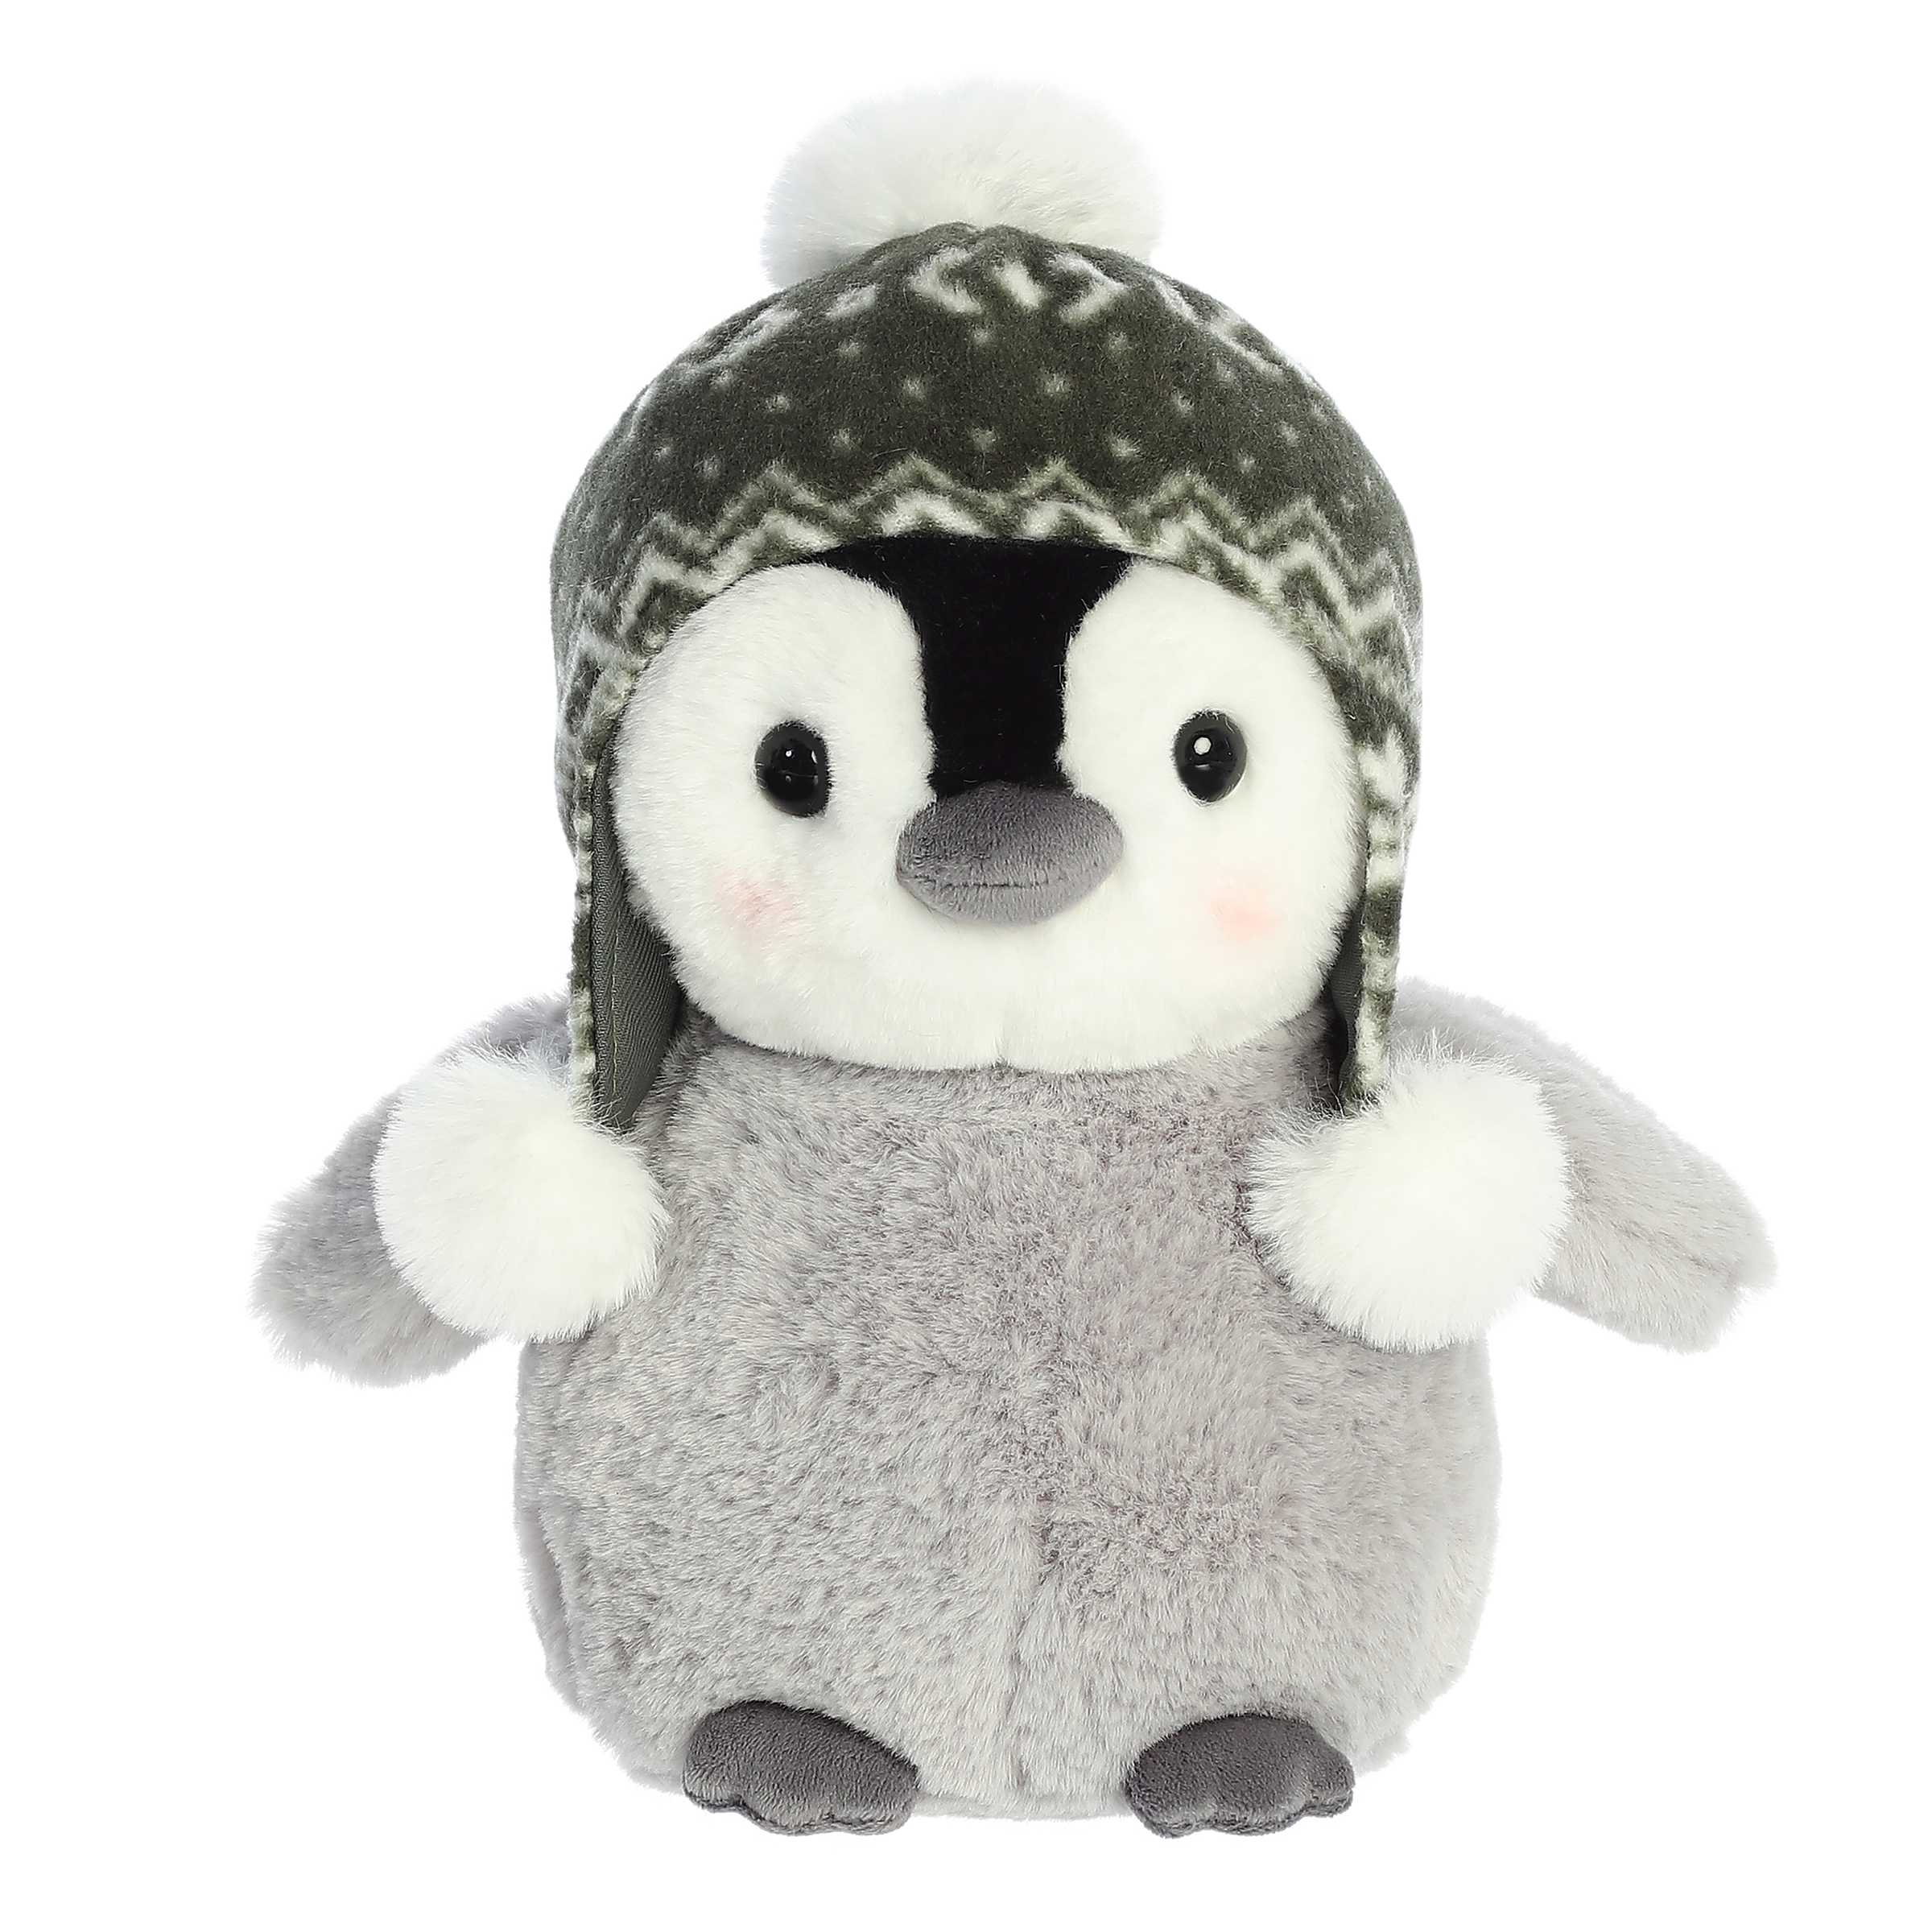 Adorable baby gray penguin chick stuffed animal with blushed cheeks wearing a black and white winter beanie